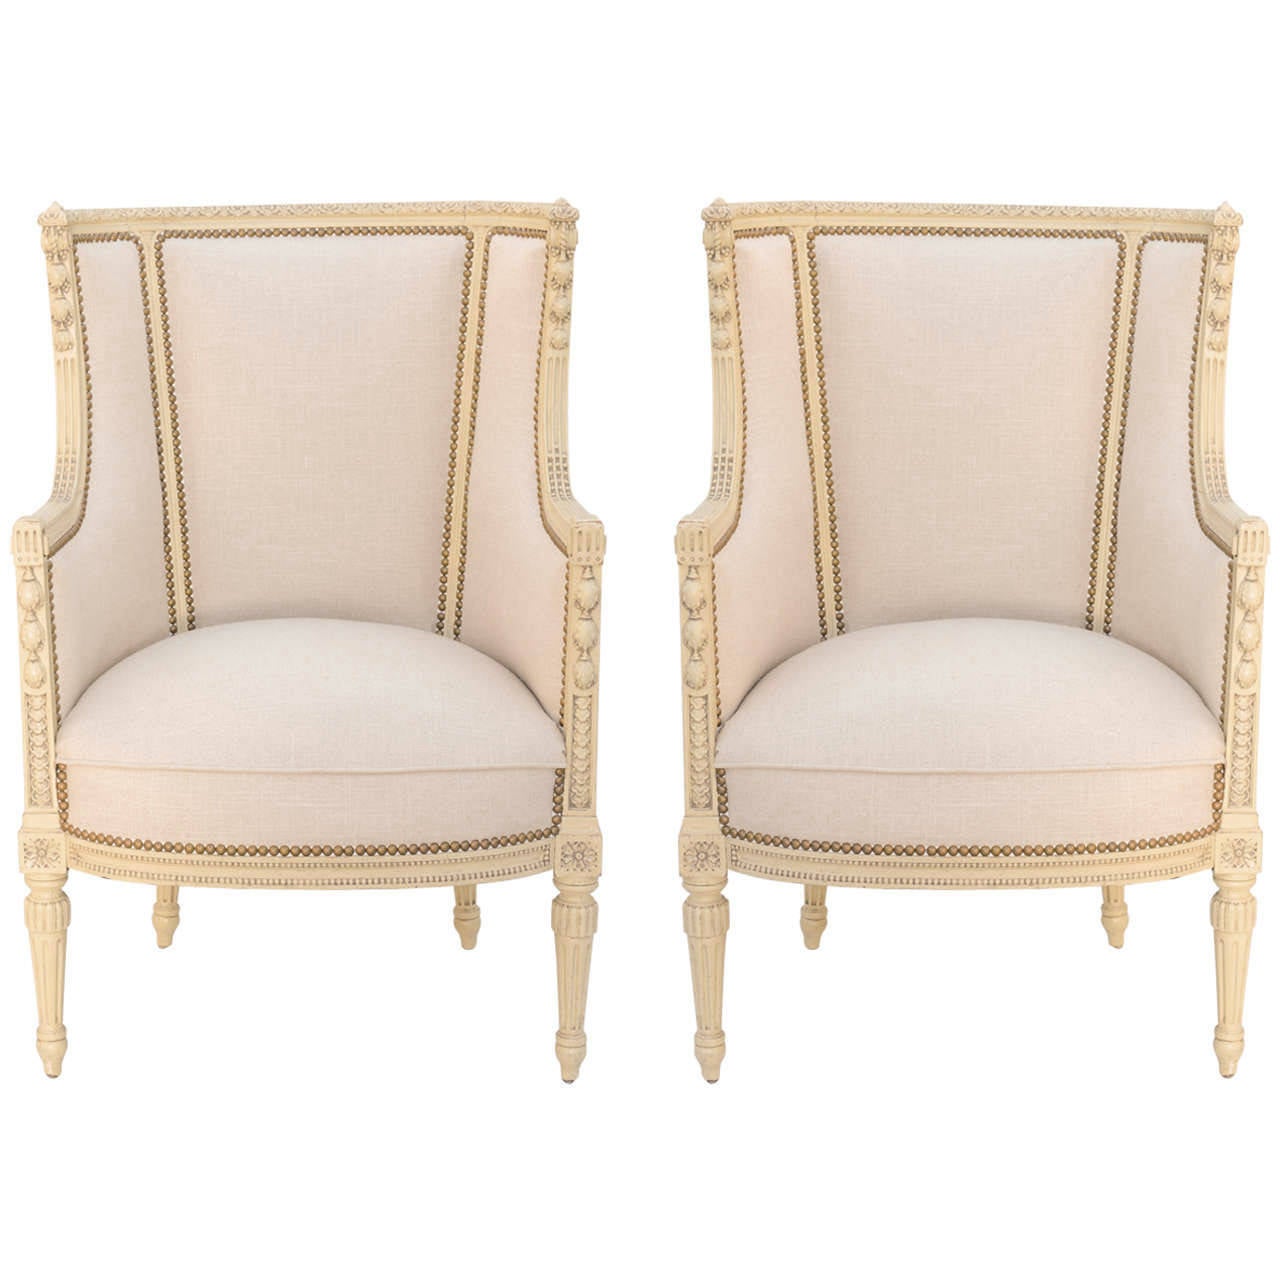 Fine Pair of Painted Bergeres in French Linen, 19th Century